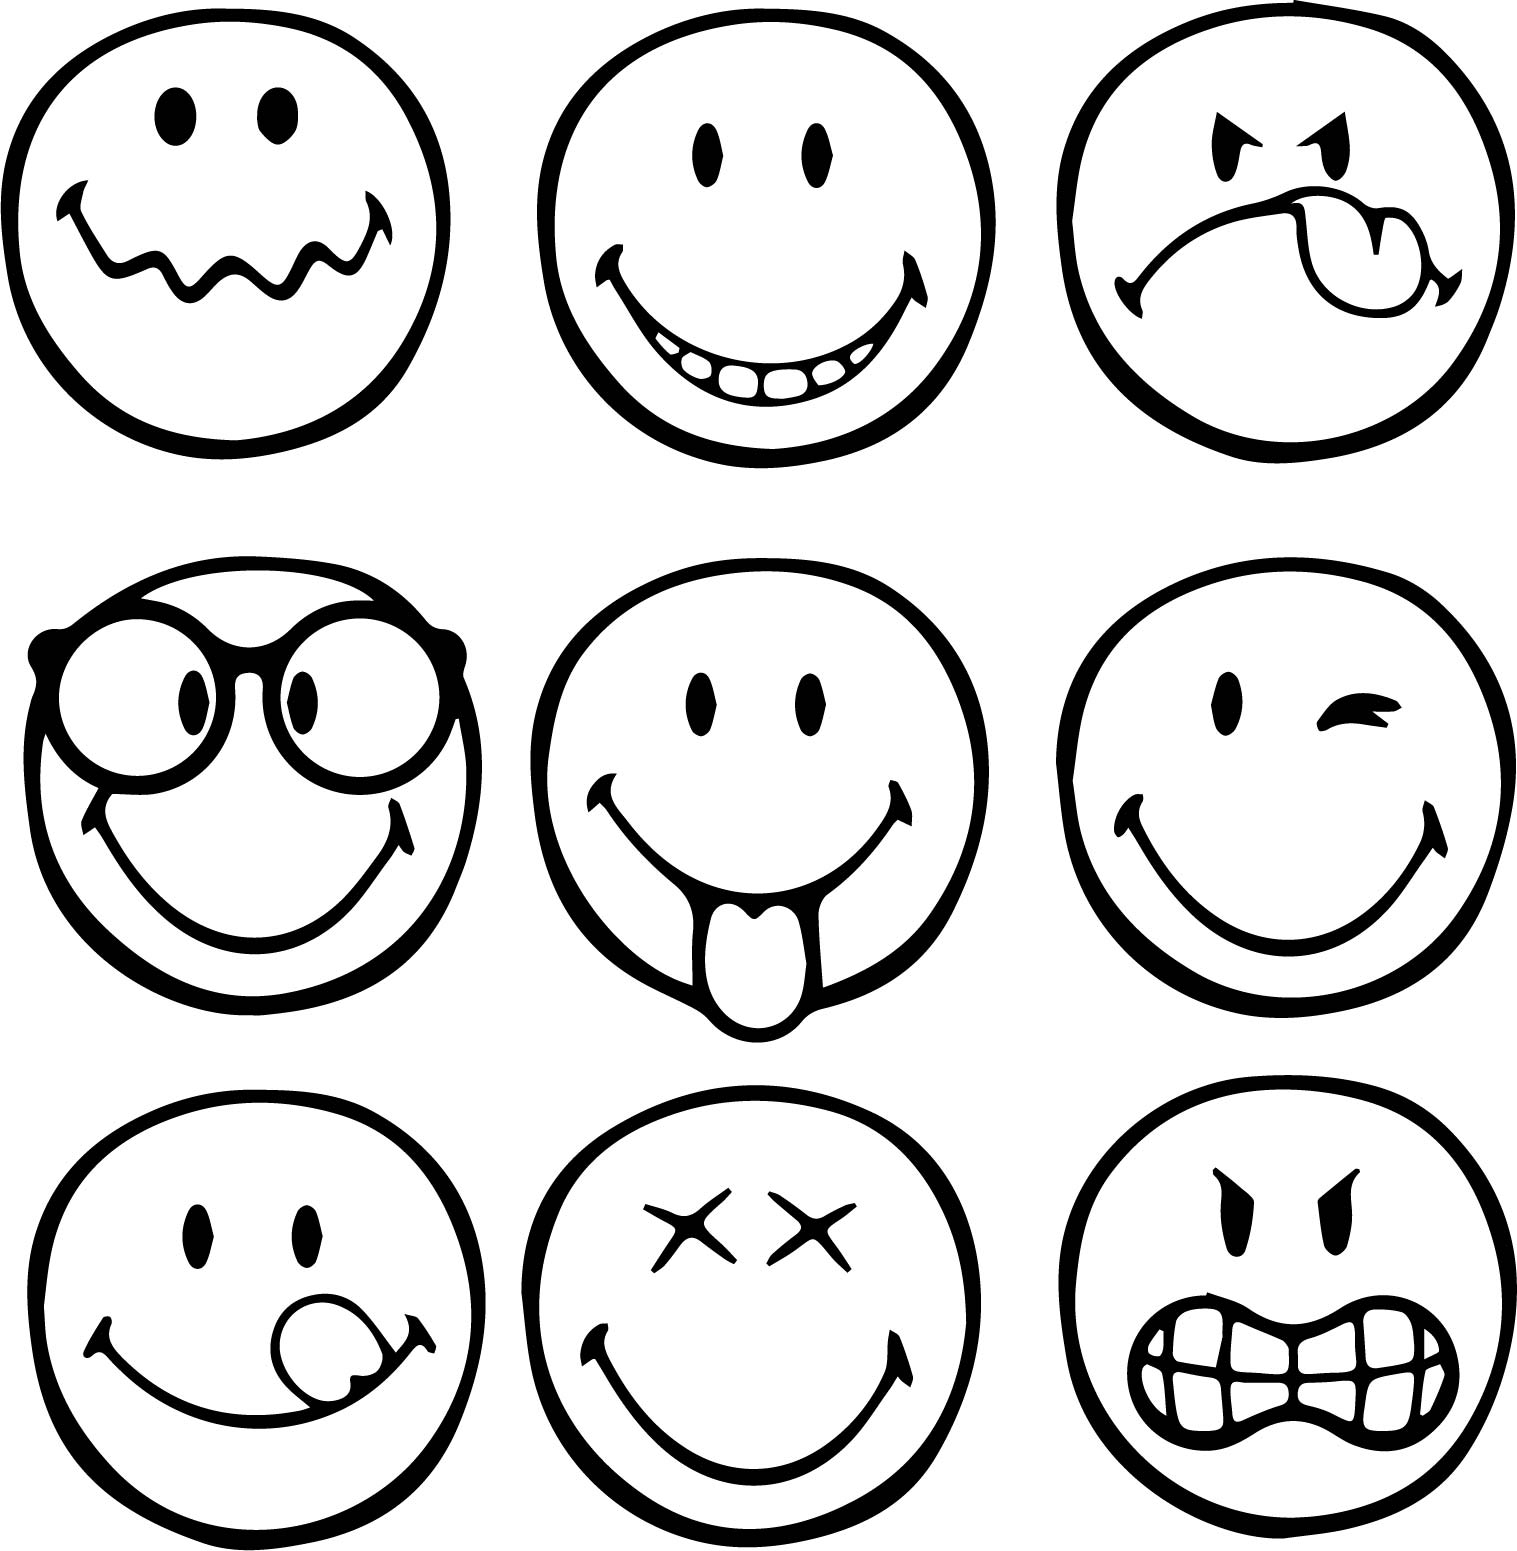 Emoji Faces Coloring Pages at Free printable